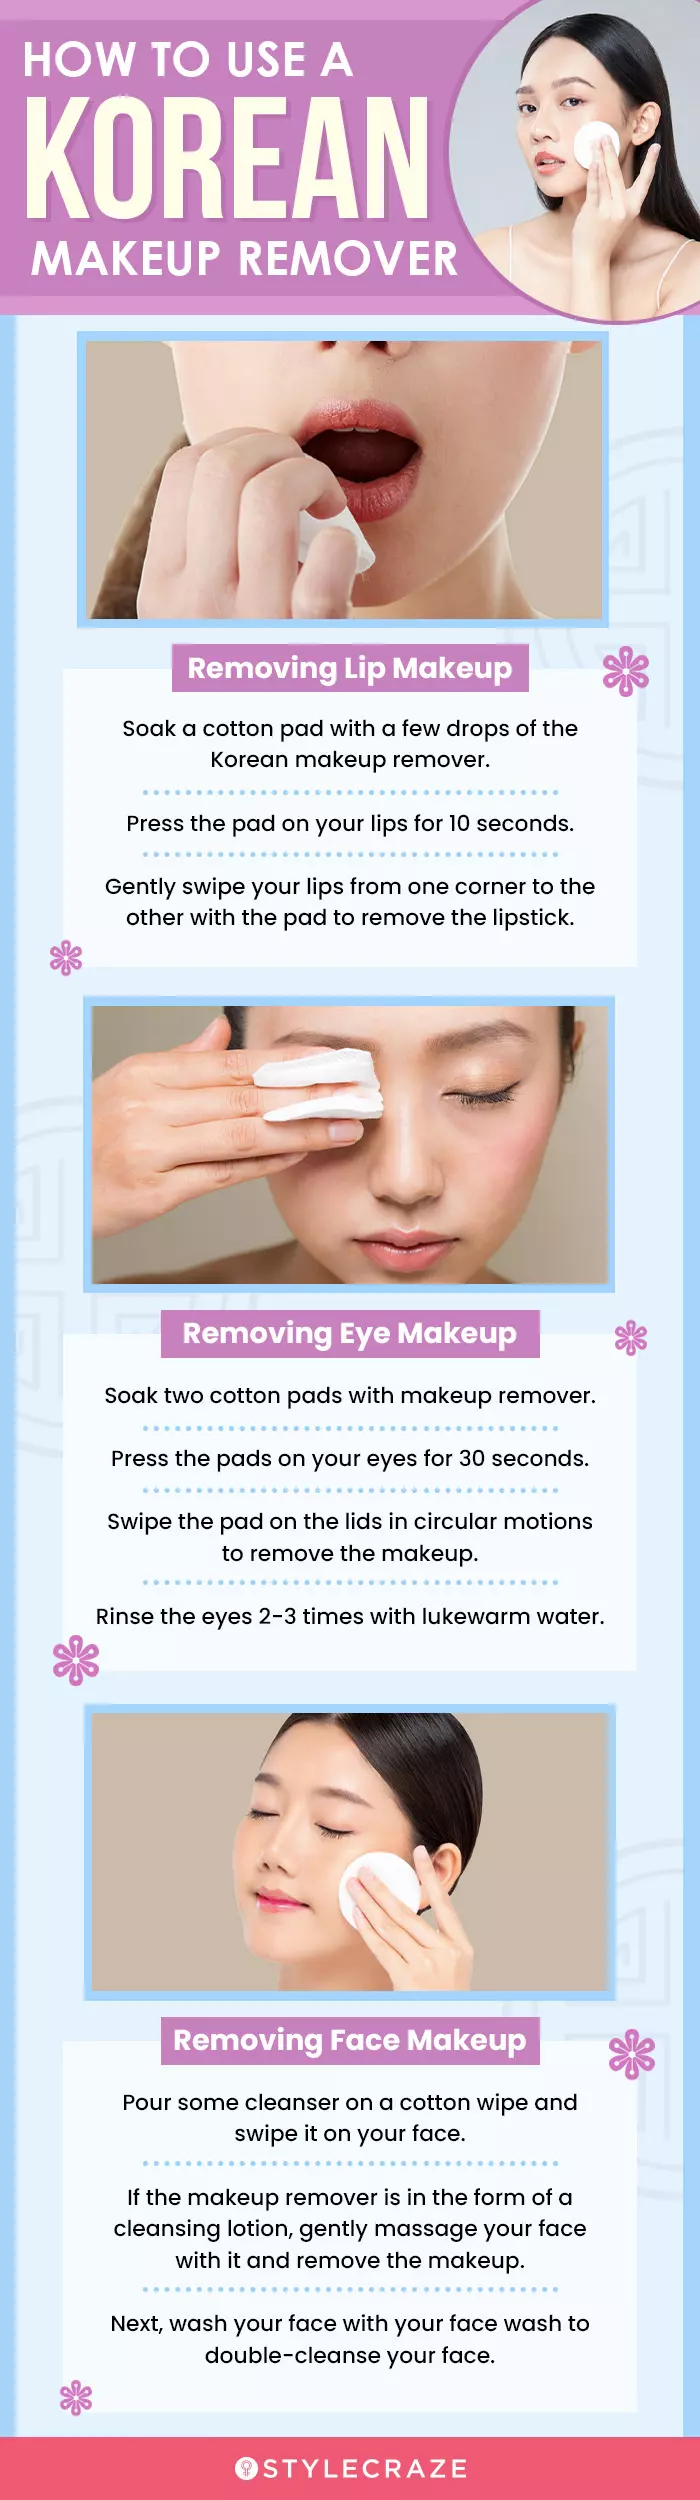 How To Use A Korean Makeup Remover (infographic)